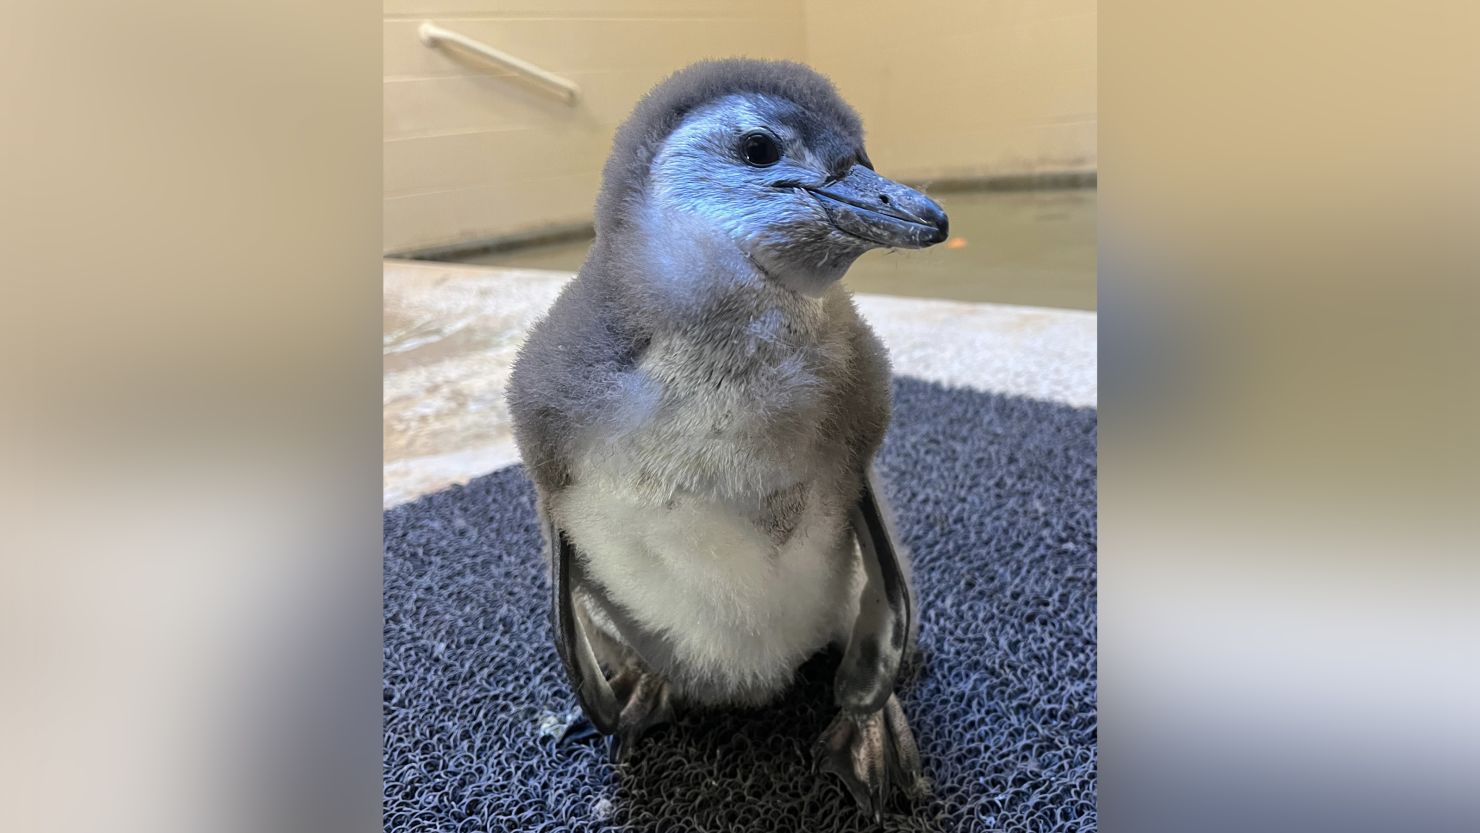 Tulsa Zoo is accepting votes on the new penguin chick's name through December 31.